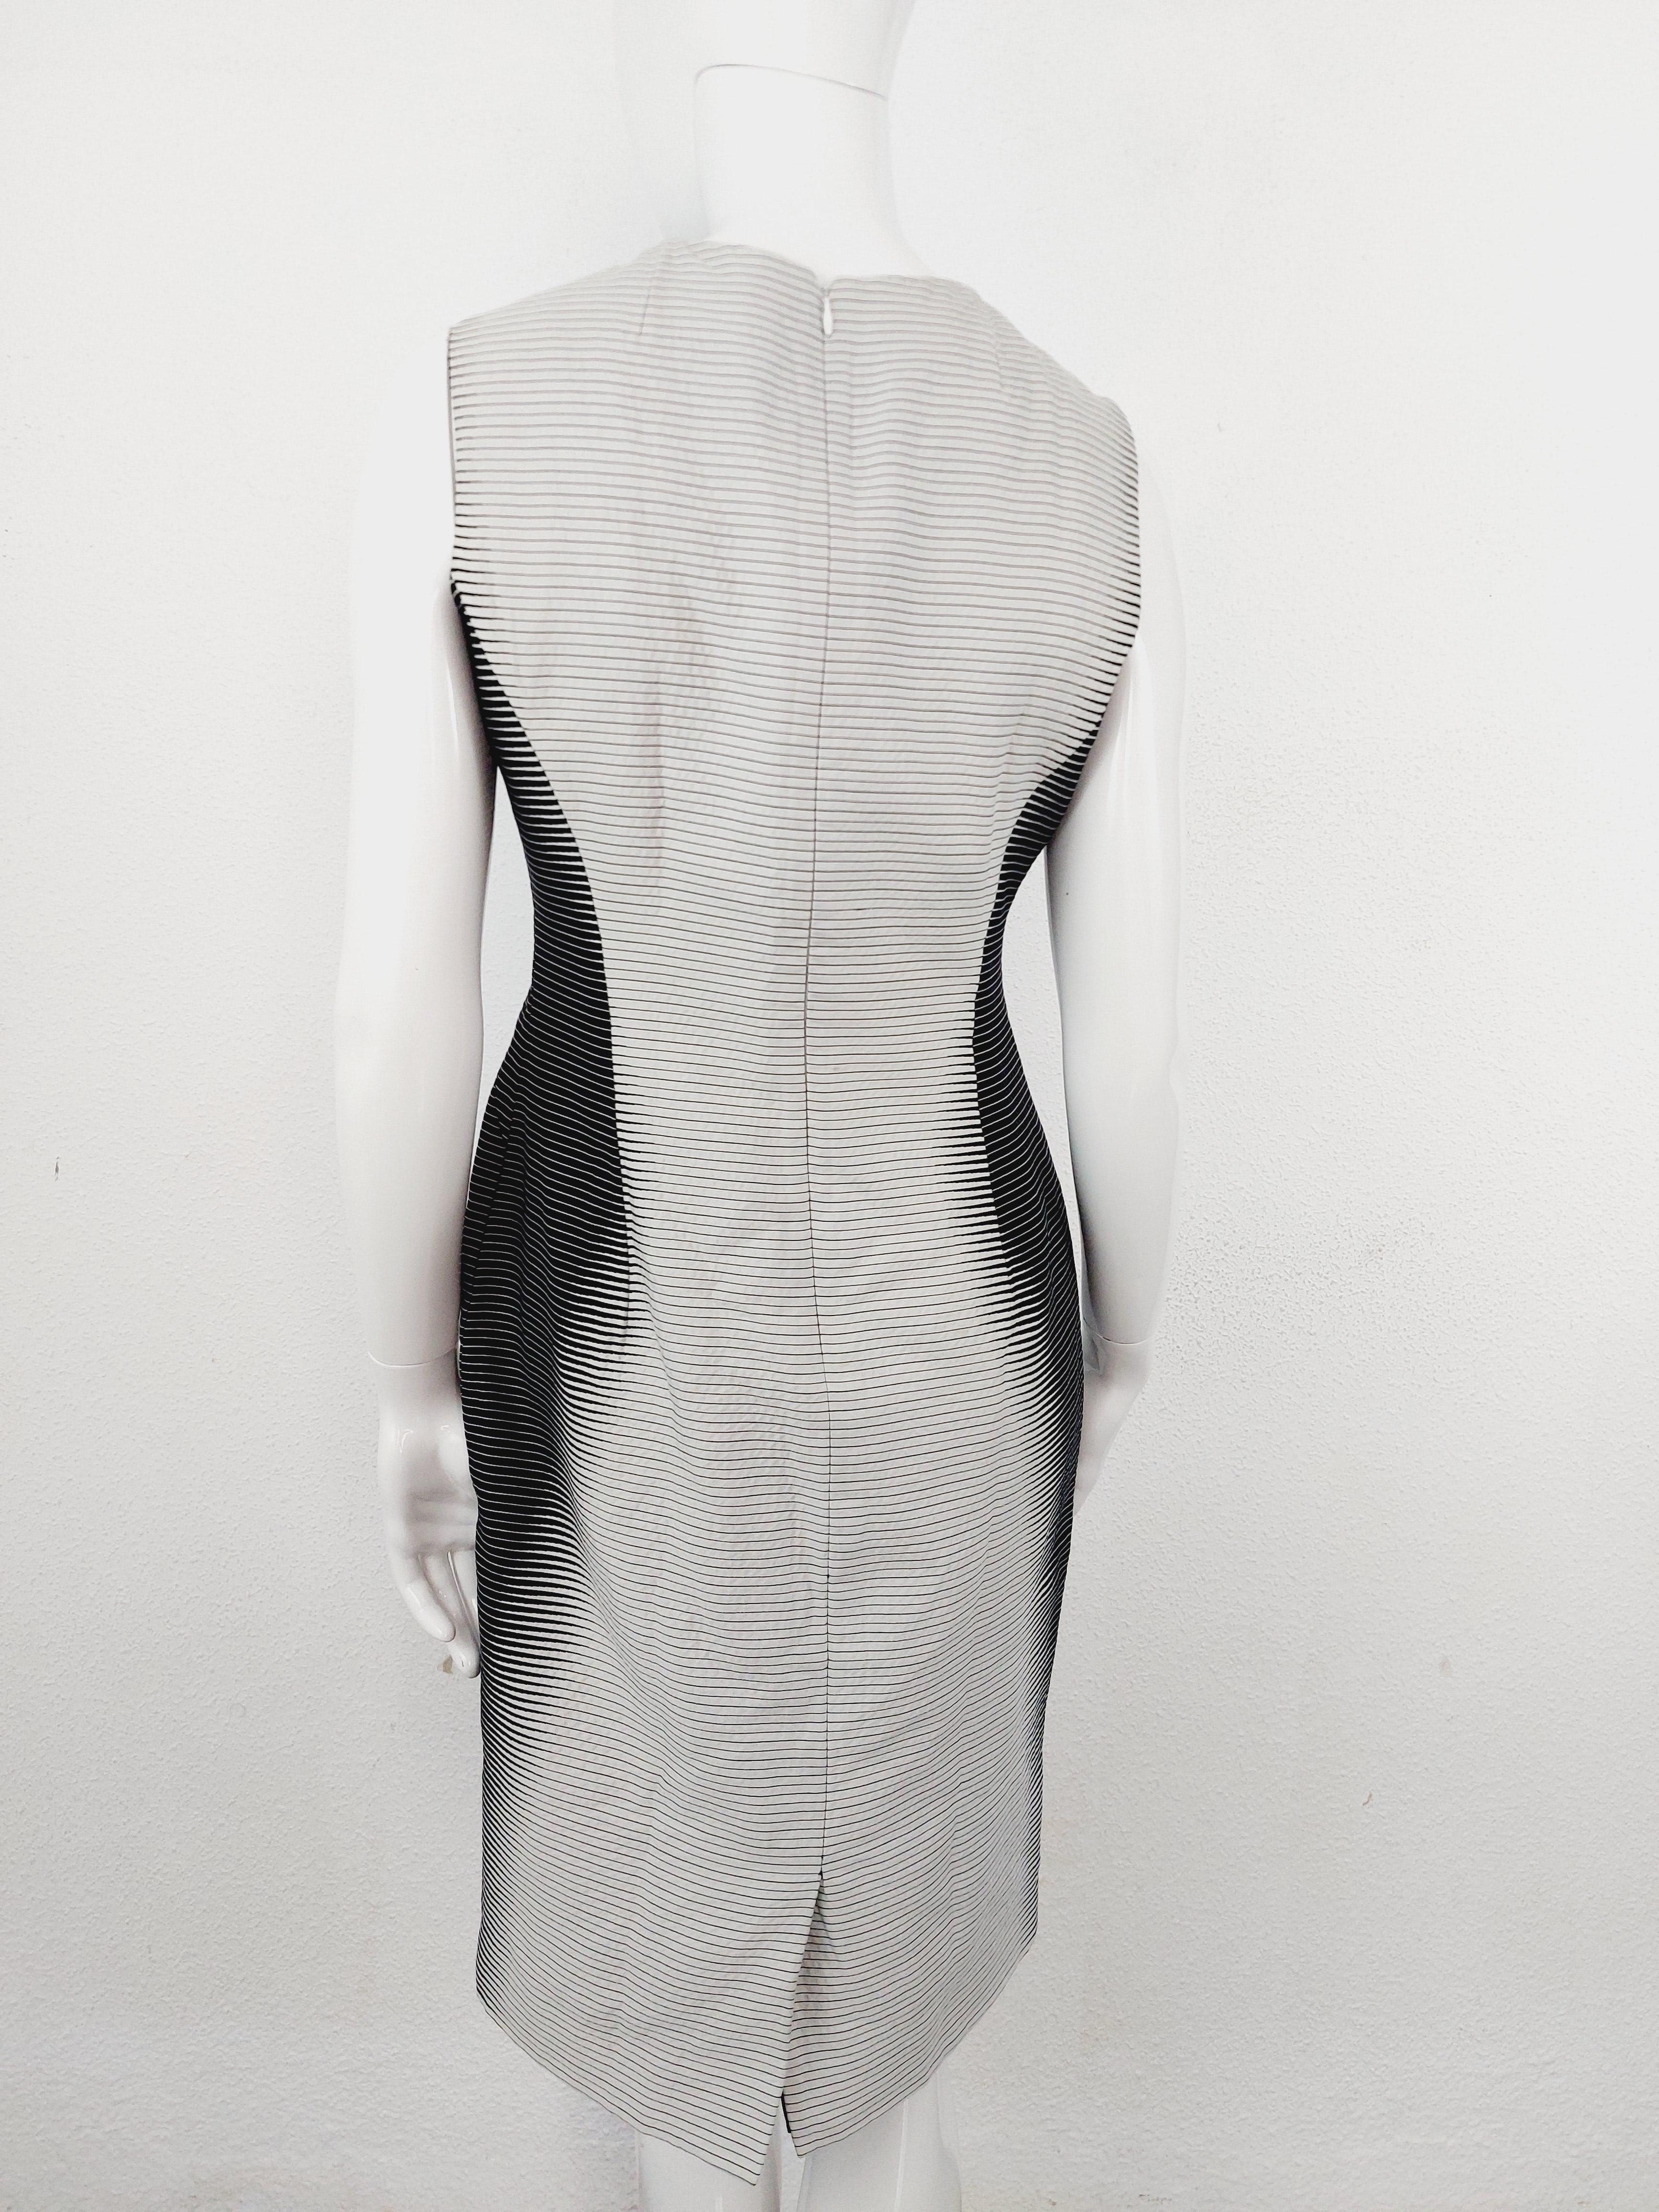 Alexander Mcqueen Optical Illusion Striped Runway Resort Collection 2009 Dress In Good Condition For Sale In PARIS, FR